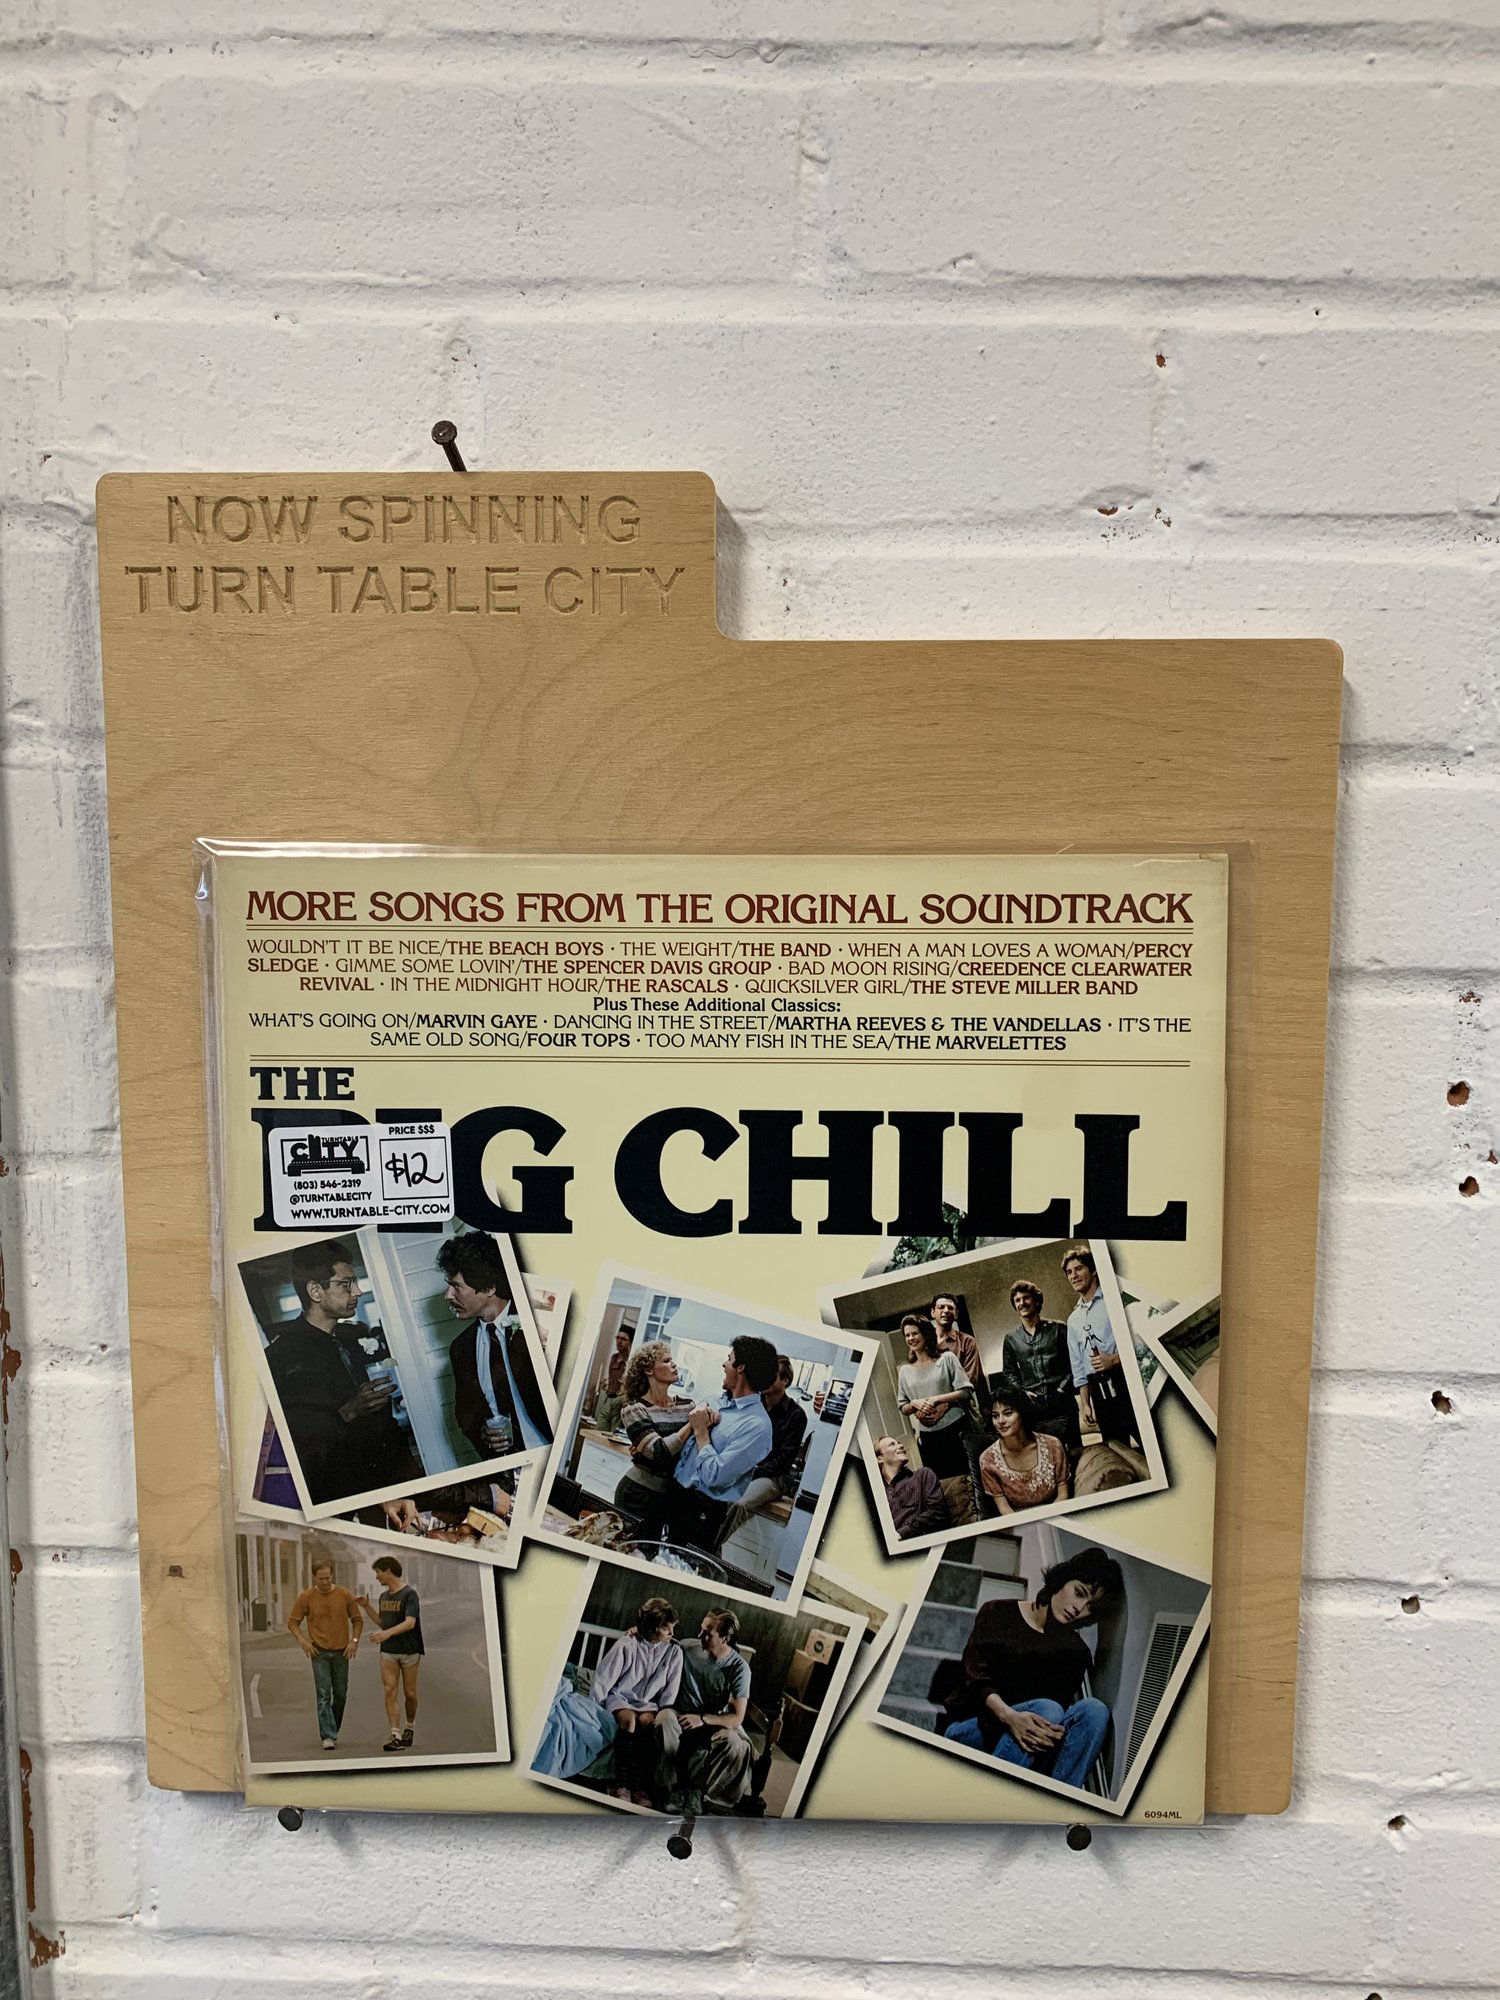 Big　Soundtrack-　More　from　The　City　Chill　(used)　—　Turntable